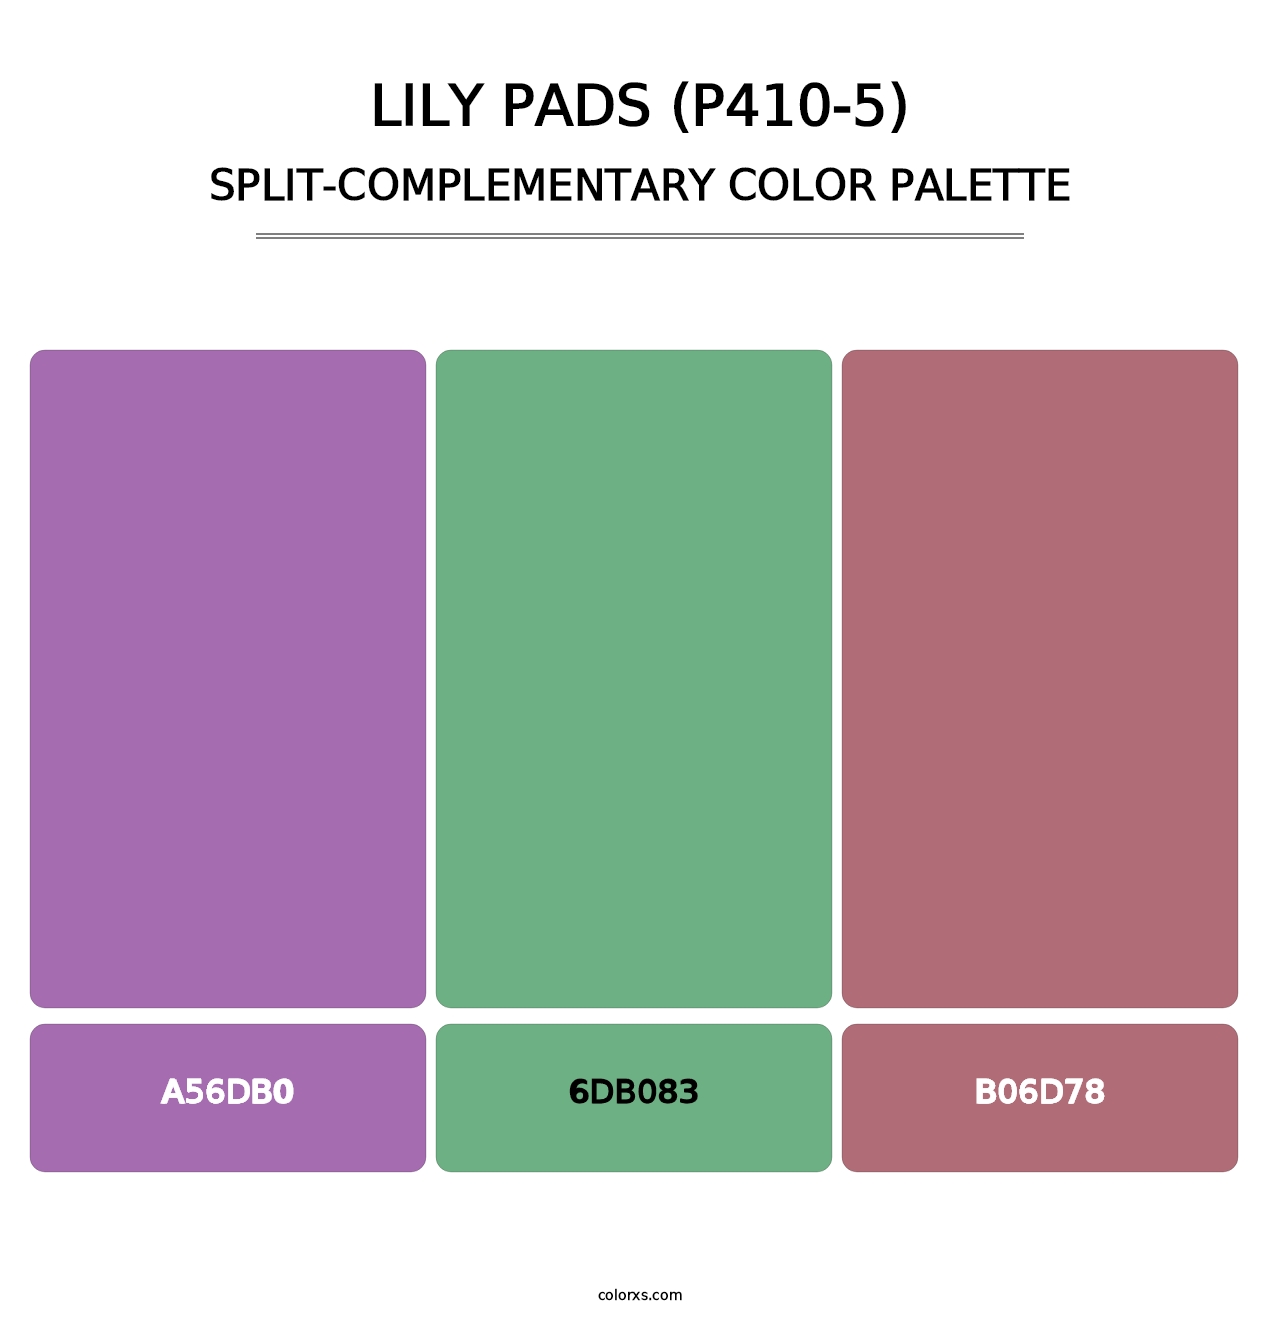 Lily Pads (P410-5) - Split-Complementary Color Palette